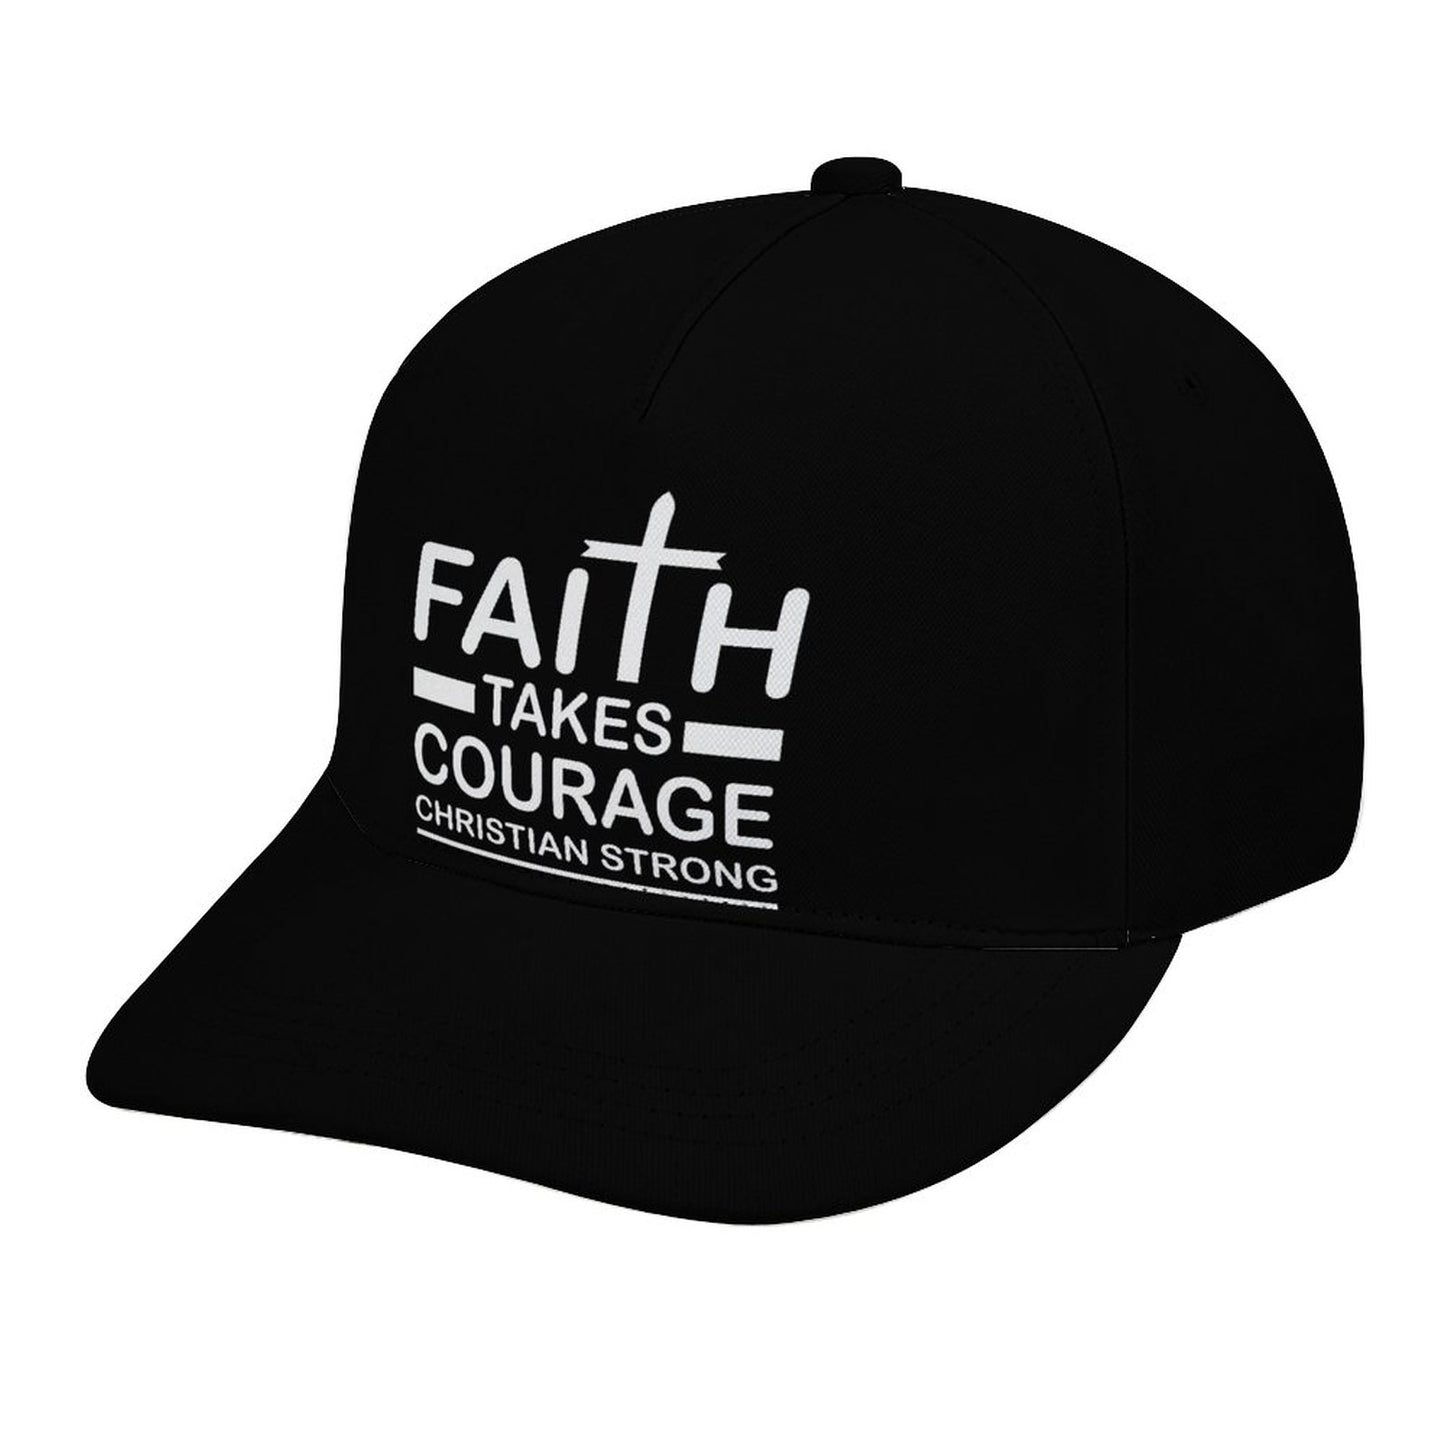 Faith Takes Courage Christian Strong Christian Hat